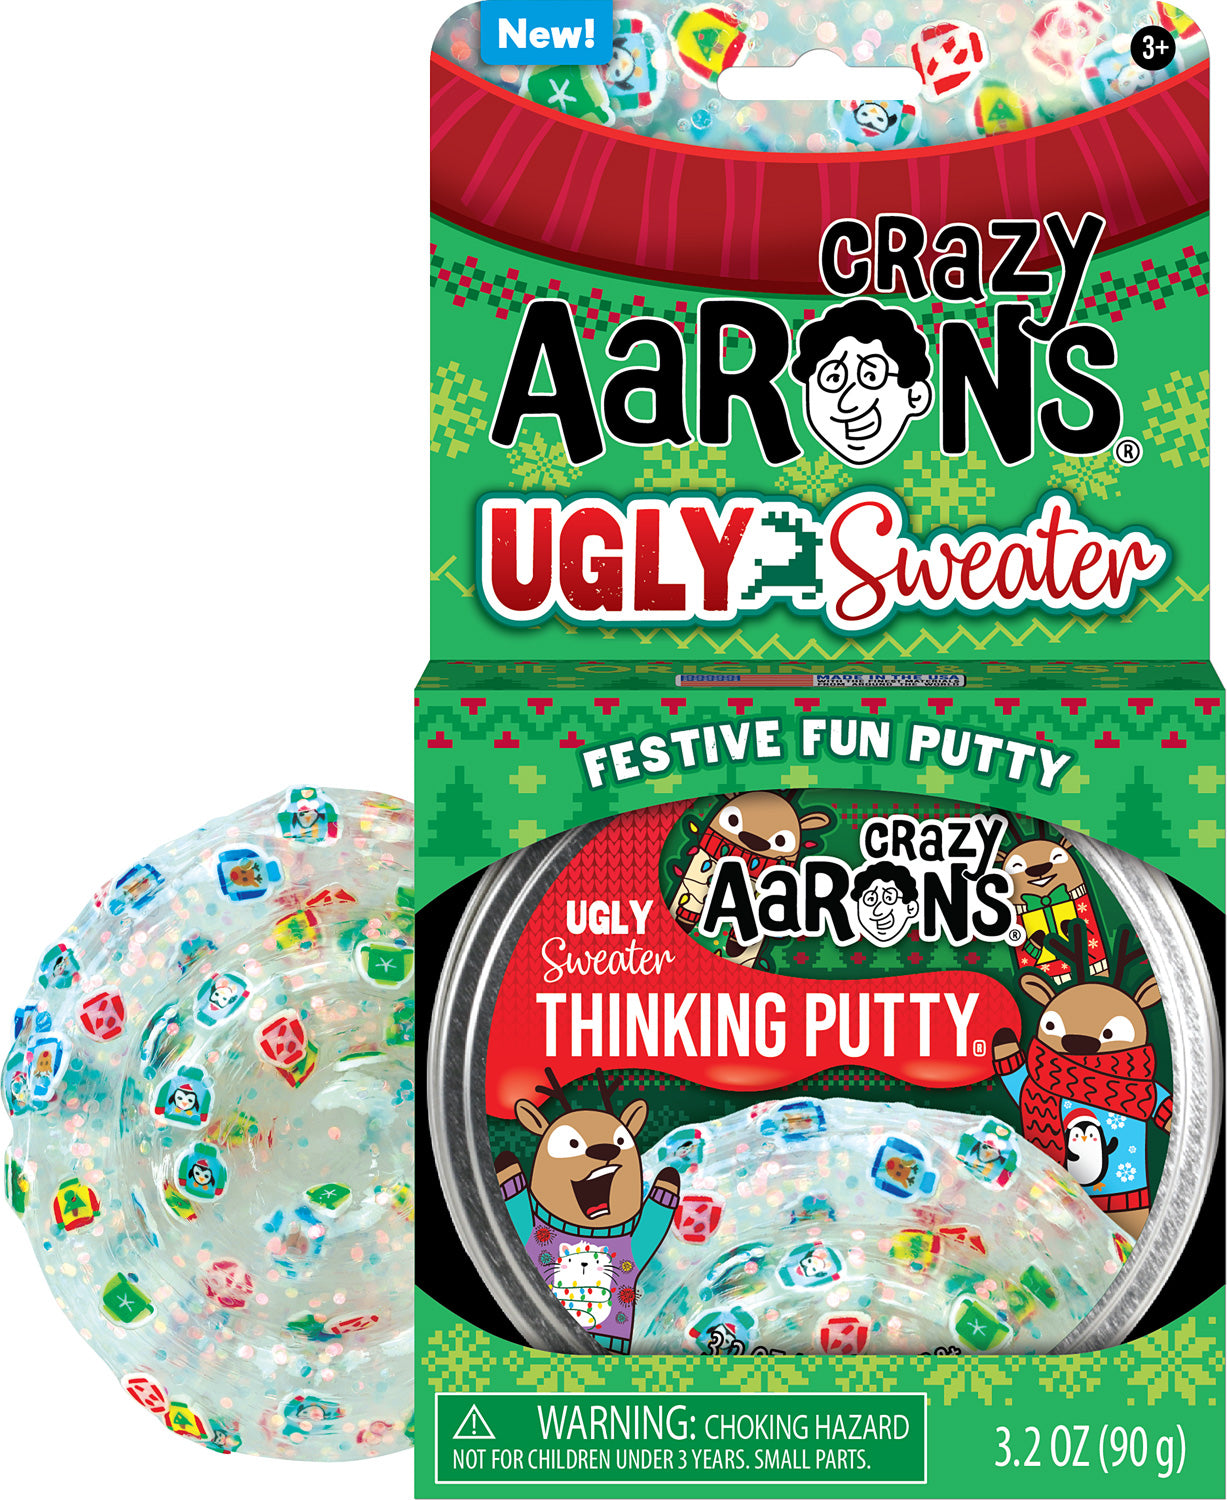 Ugly Sweater 4” Thinking Putty by Crazy Aaron’s #UG020